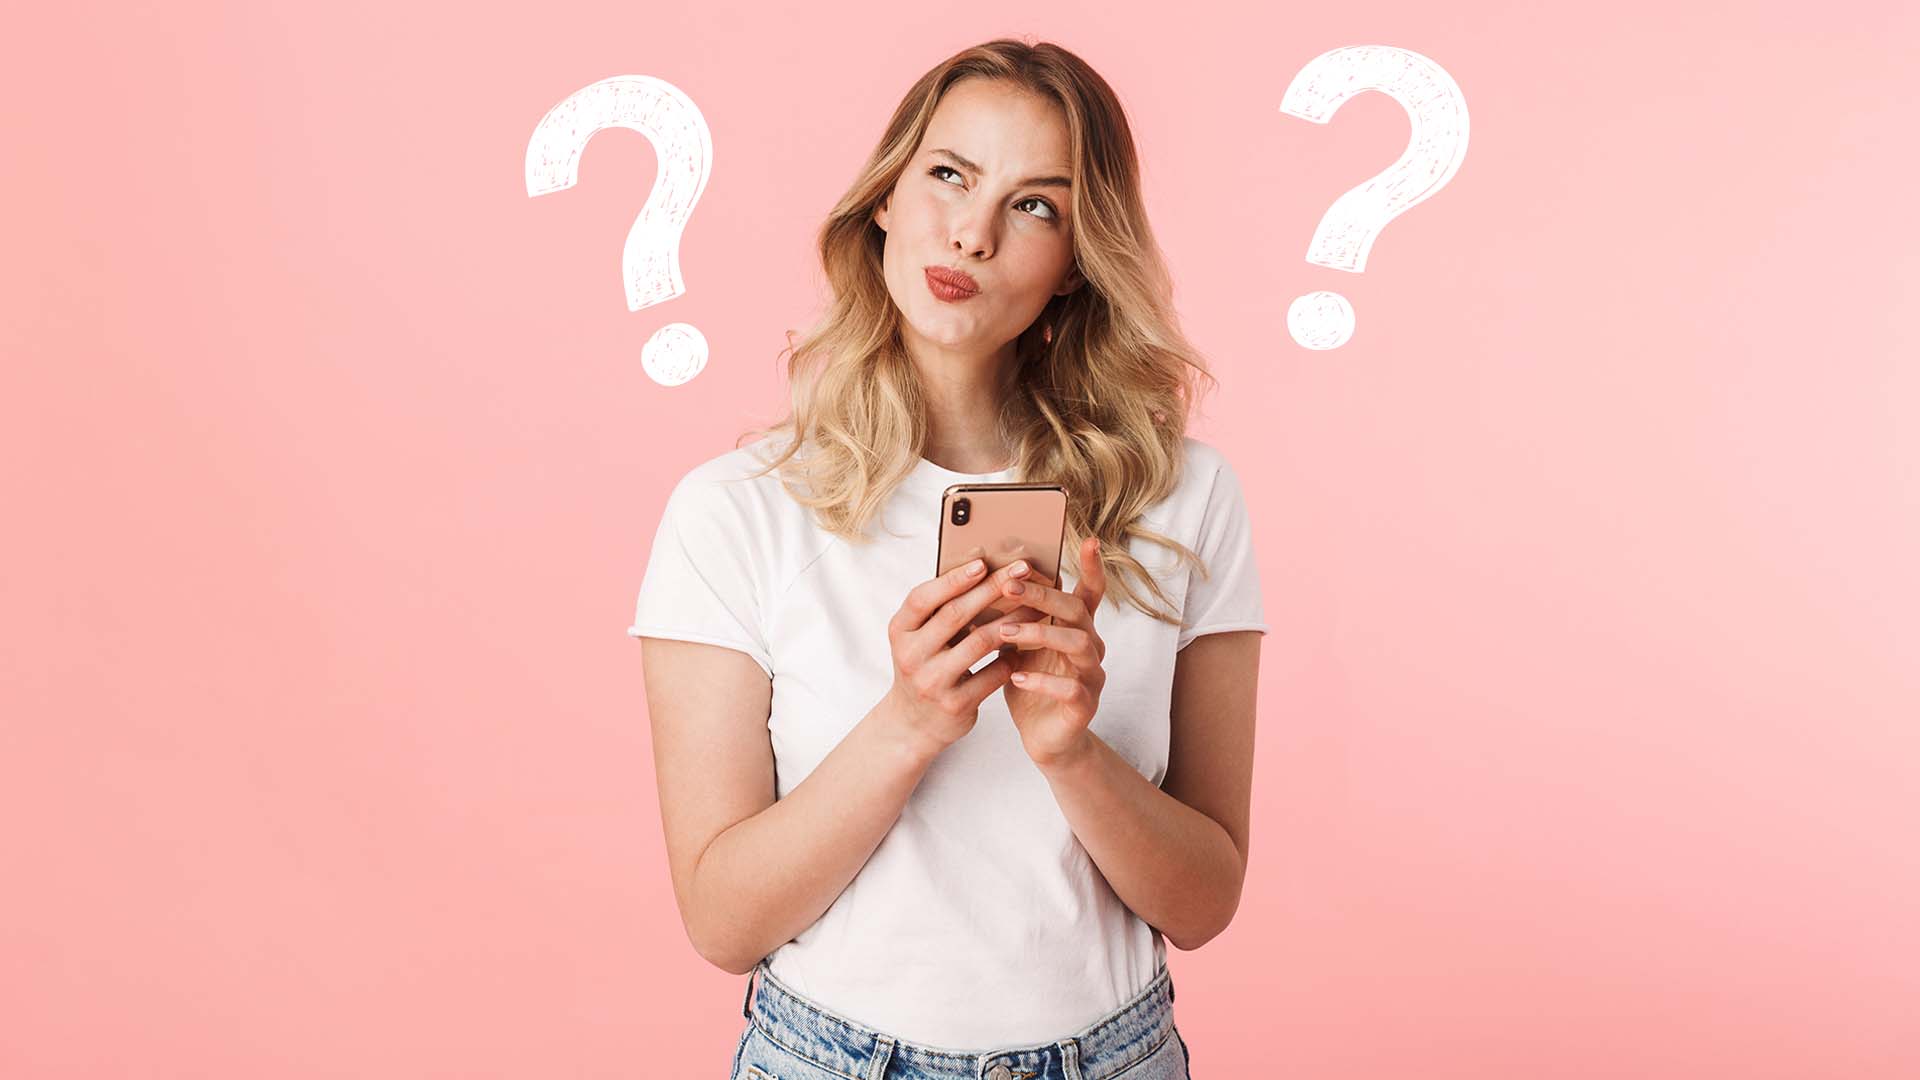 Younger blonde woman in white short-sleeved shirt holding her phone and looking confused with two question marks next to her.